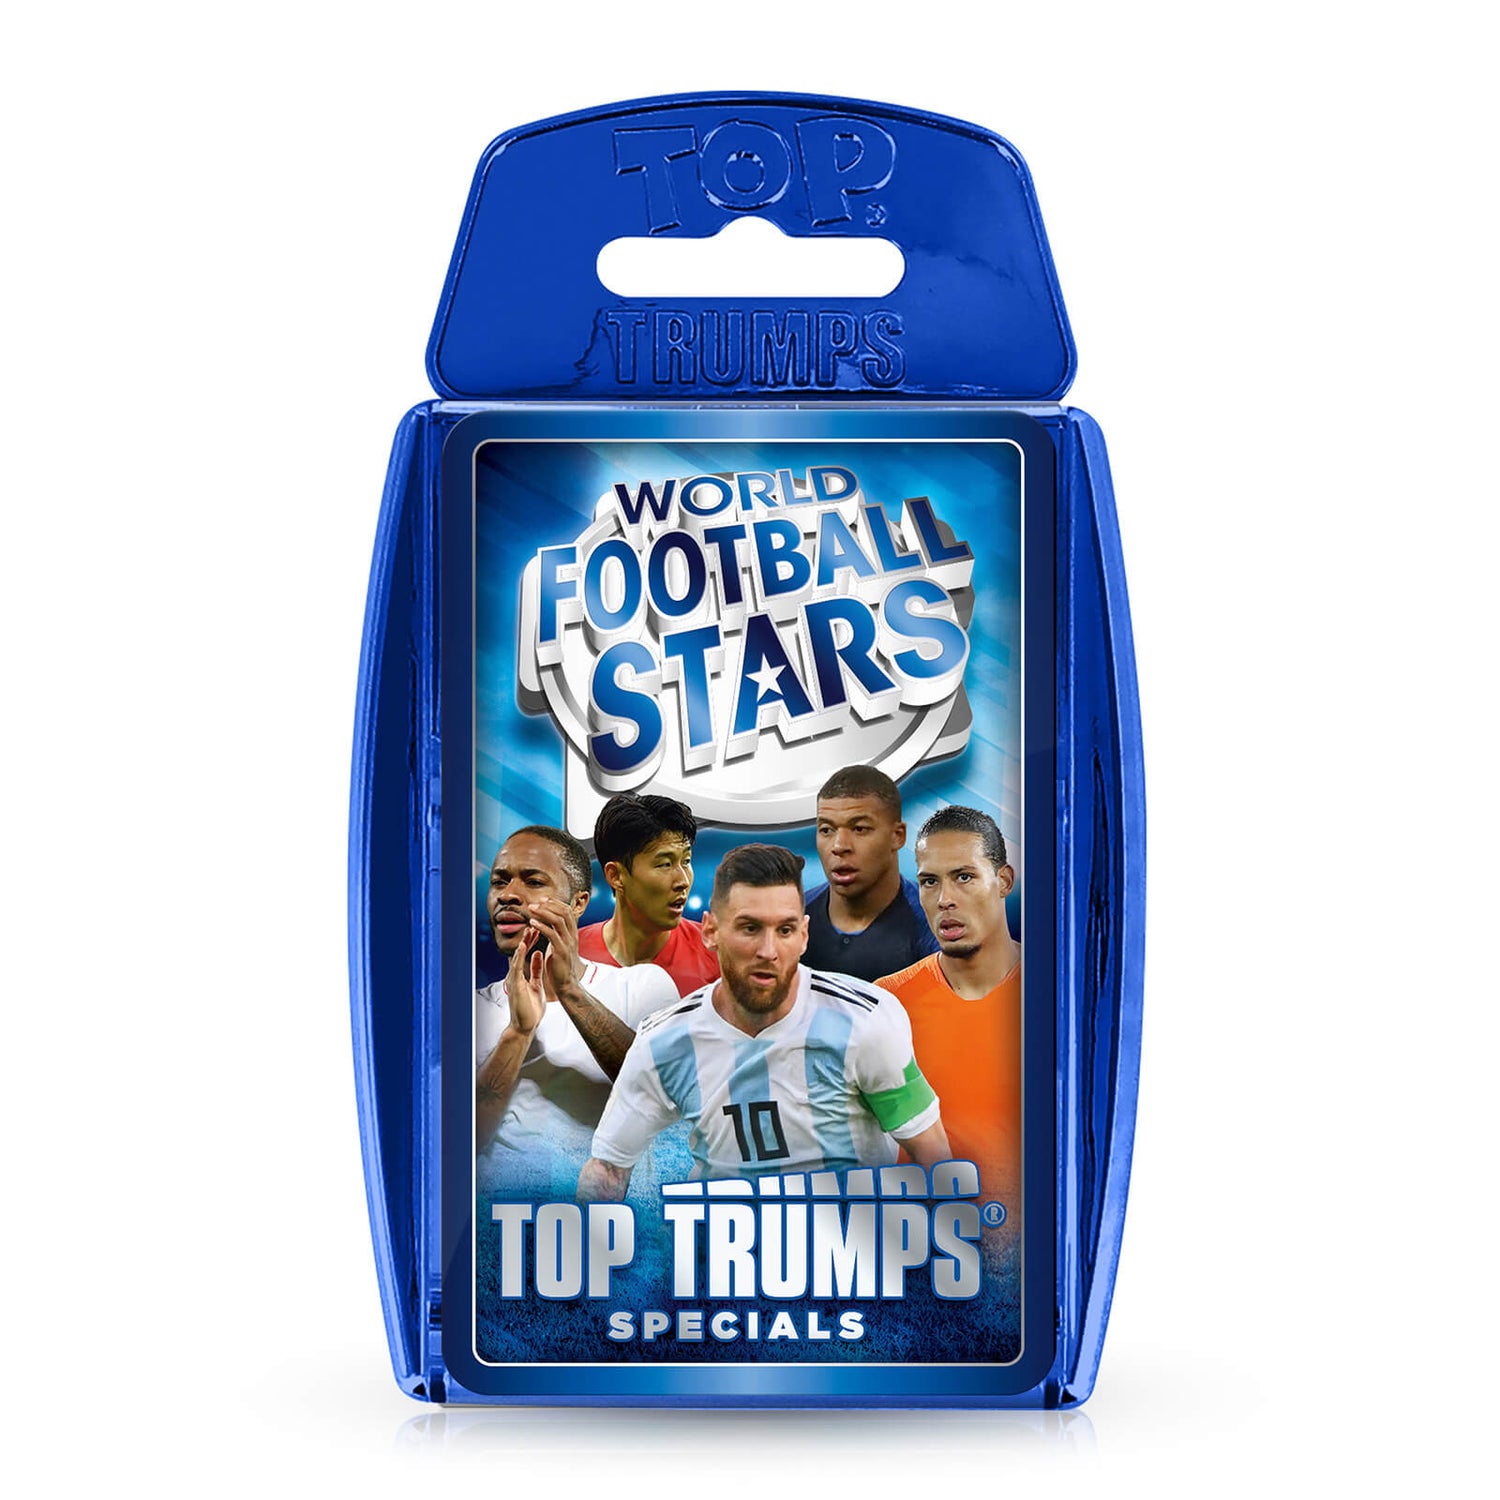 World Football Stars Blue Top Trumps Specials Card Game